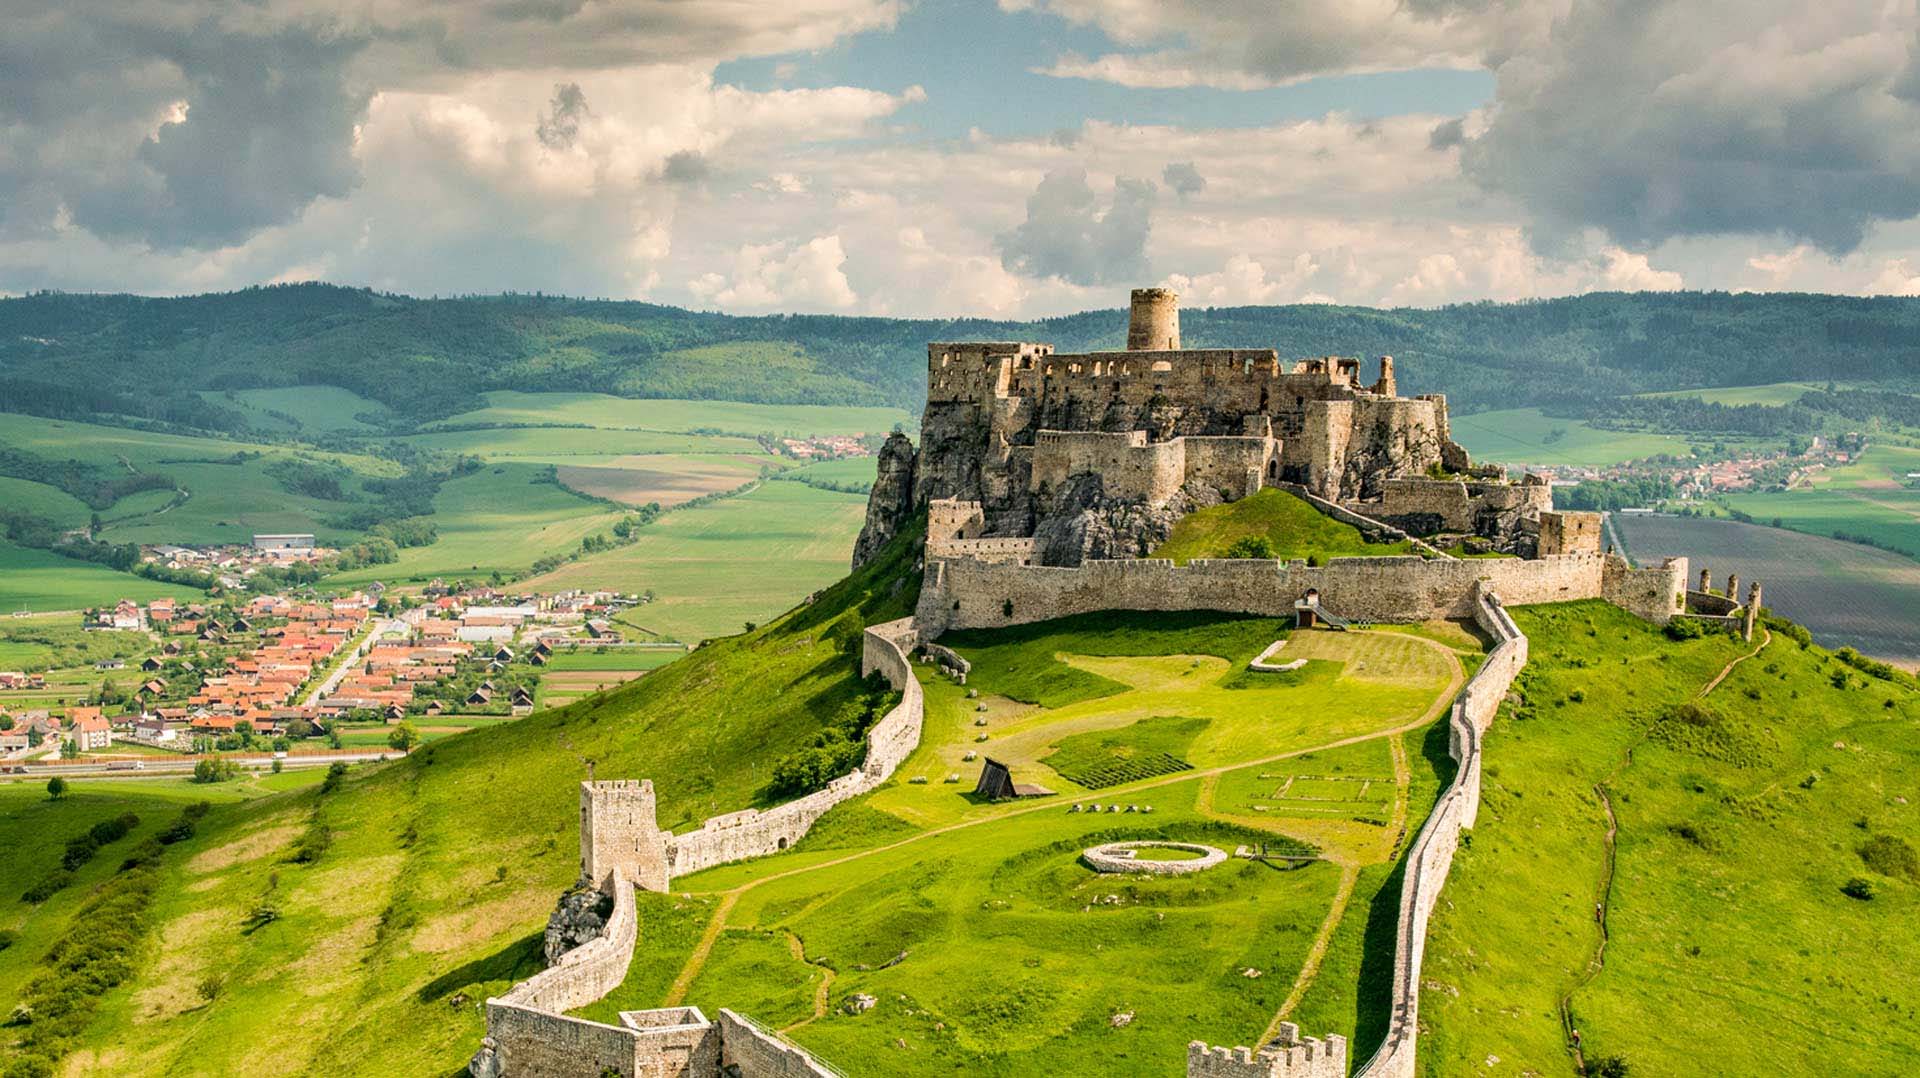 Trip In Slovakia Guided Tours and Excursions in Slovakia Spis castle UNESCO Monumental fortress